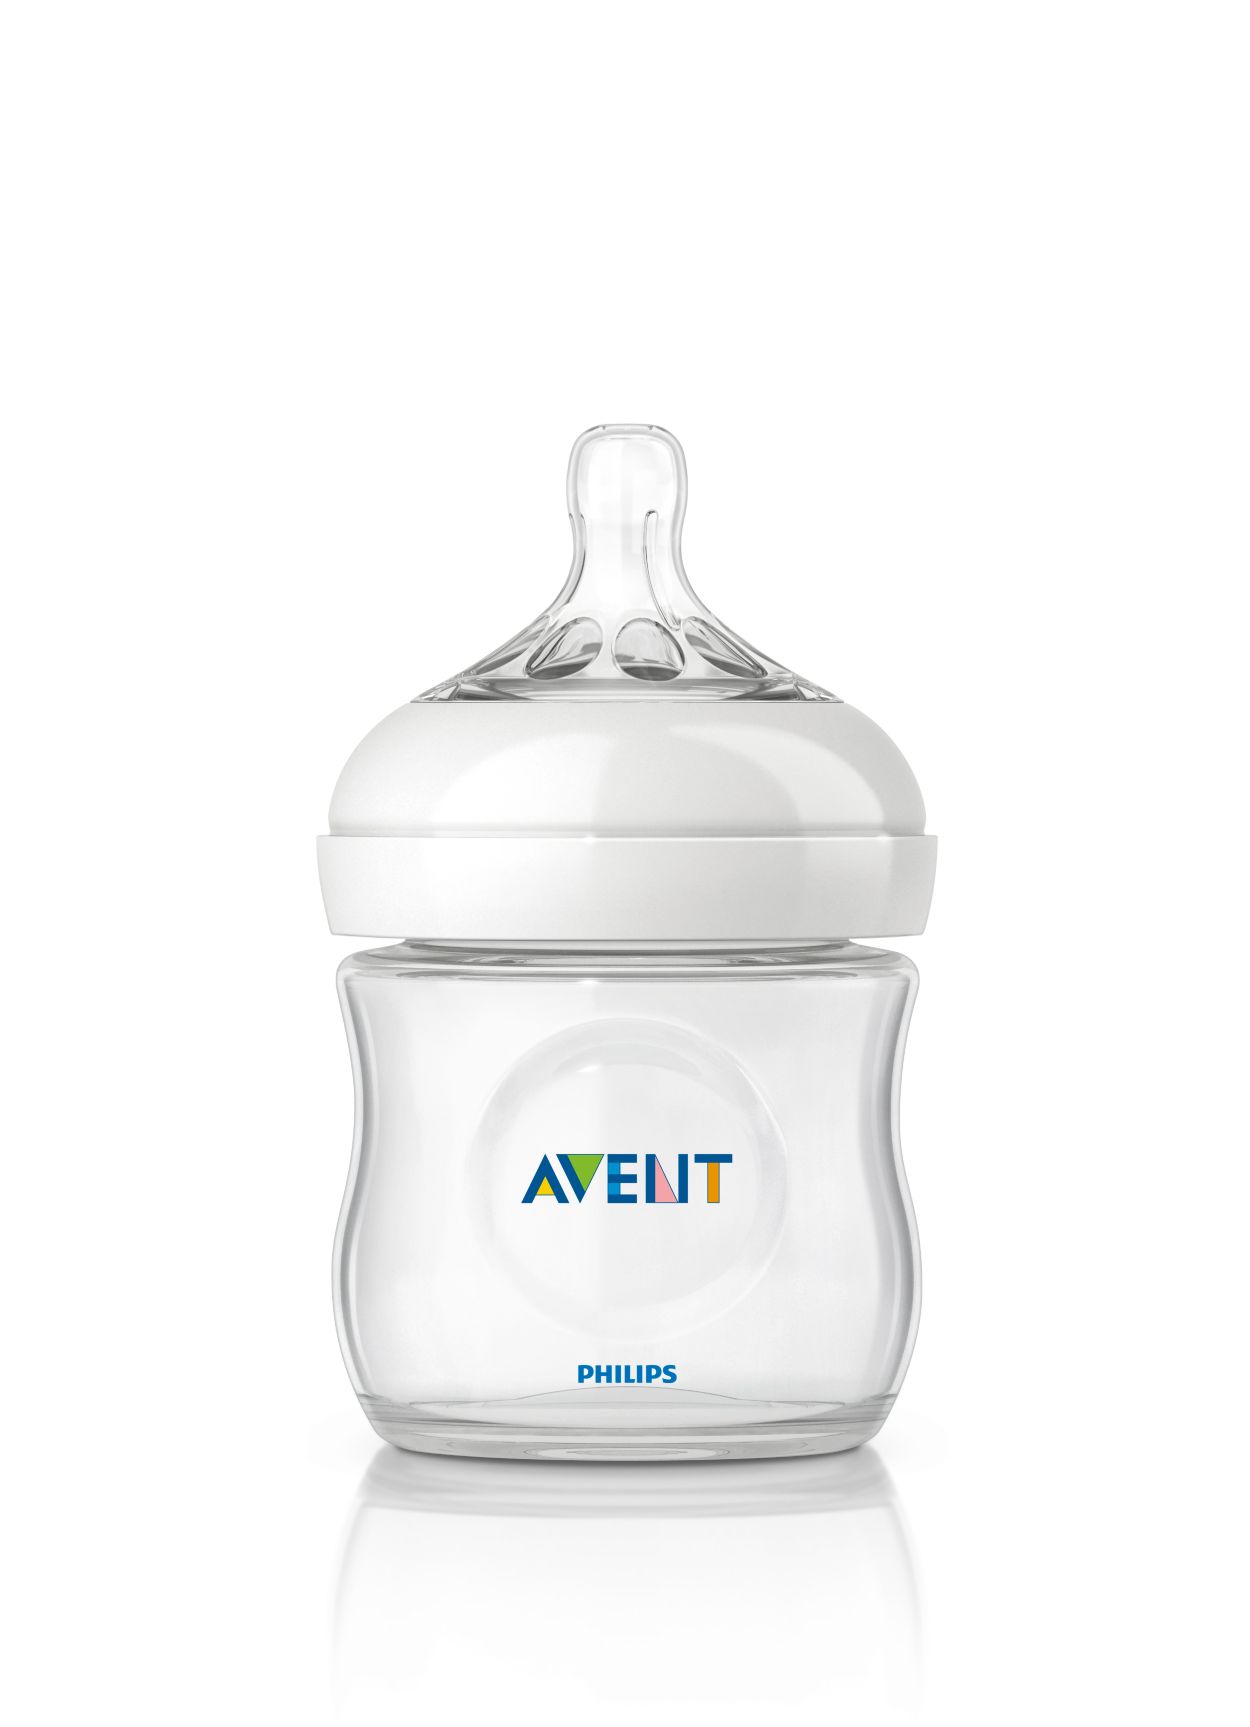 tiralatte manuale avent natural - AVENT by Philips - RAM Apparecchi Medicali